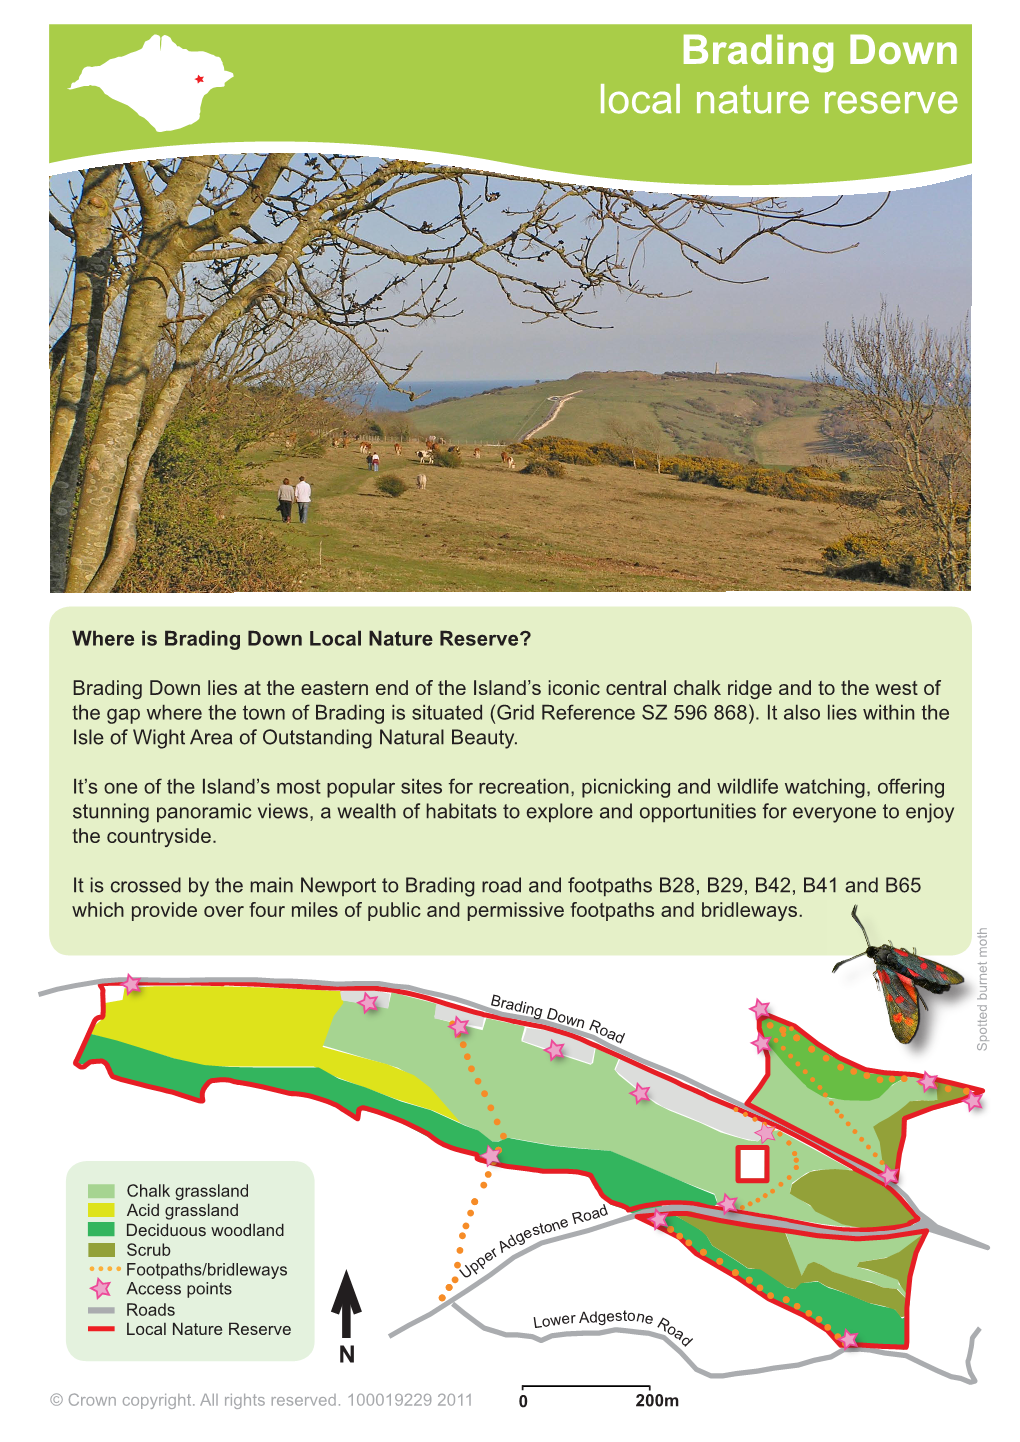 Brading Down Local Nature Reserve